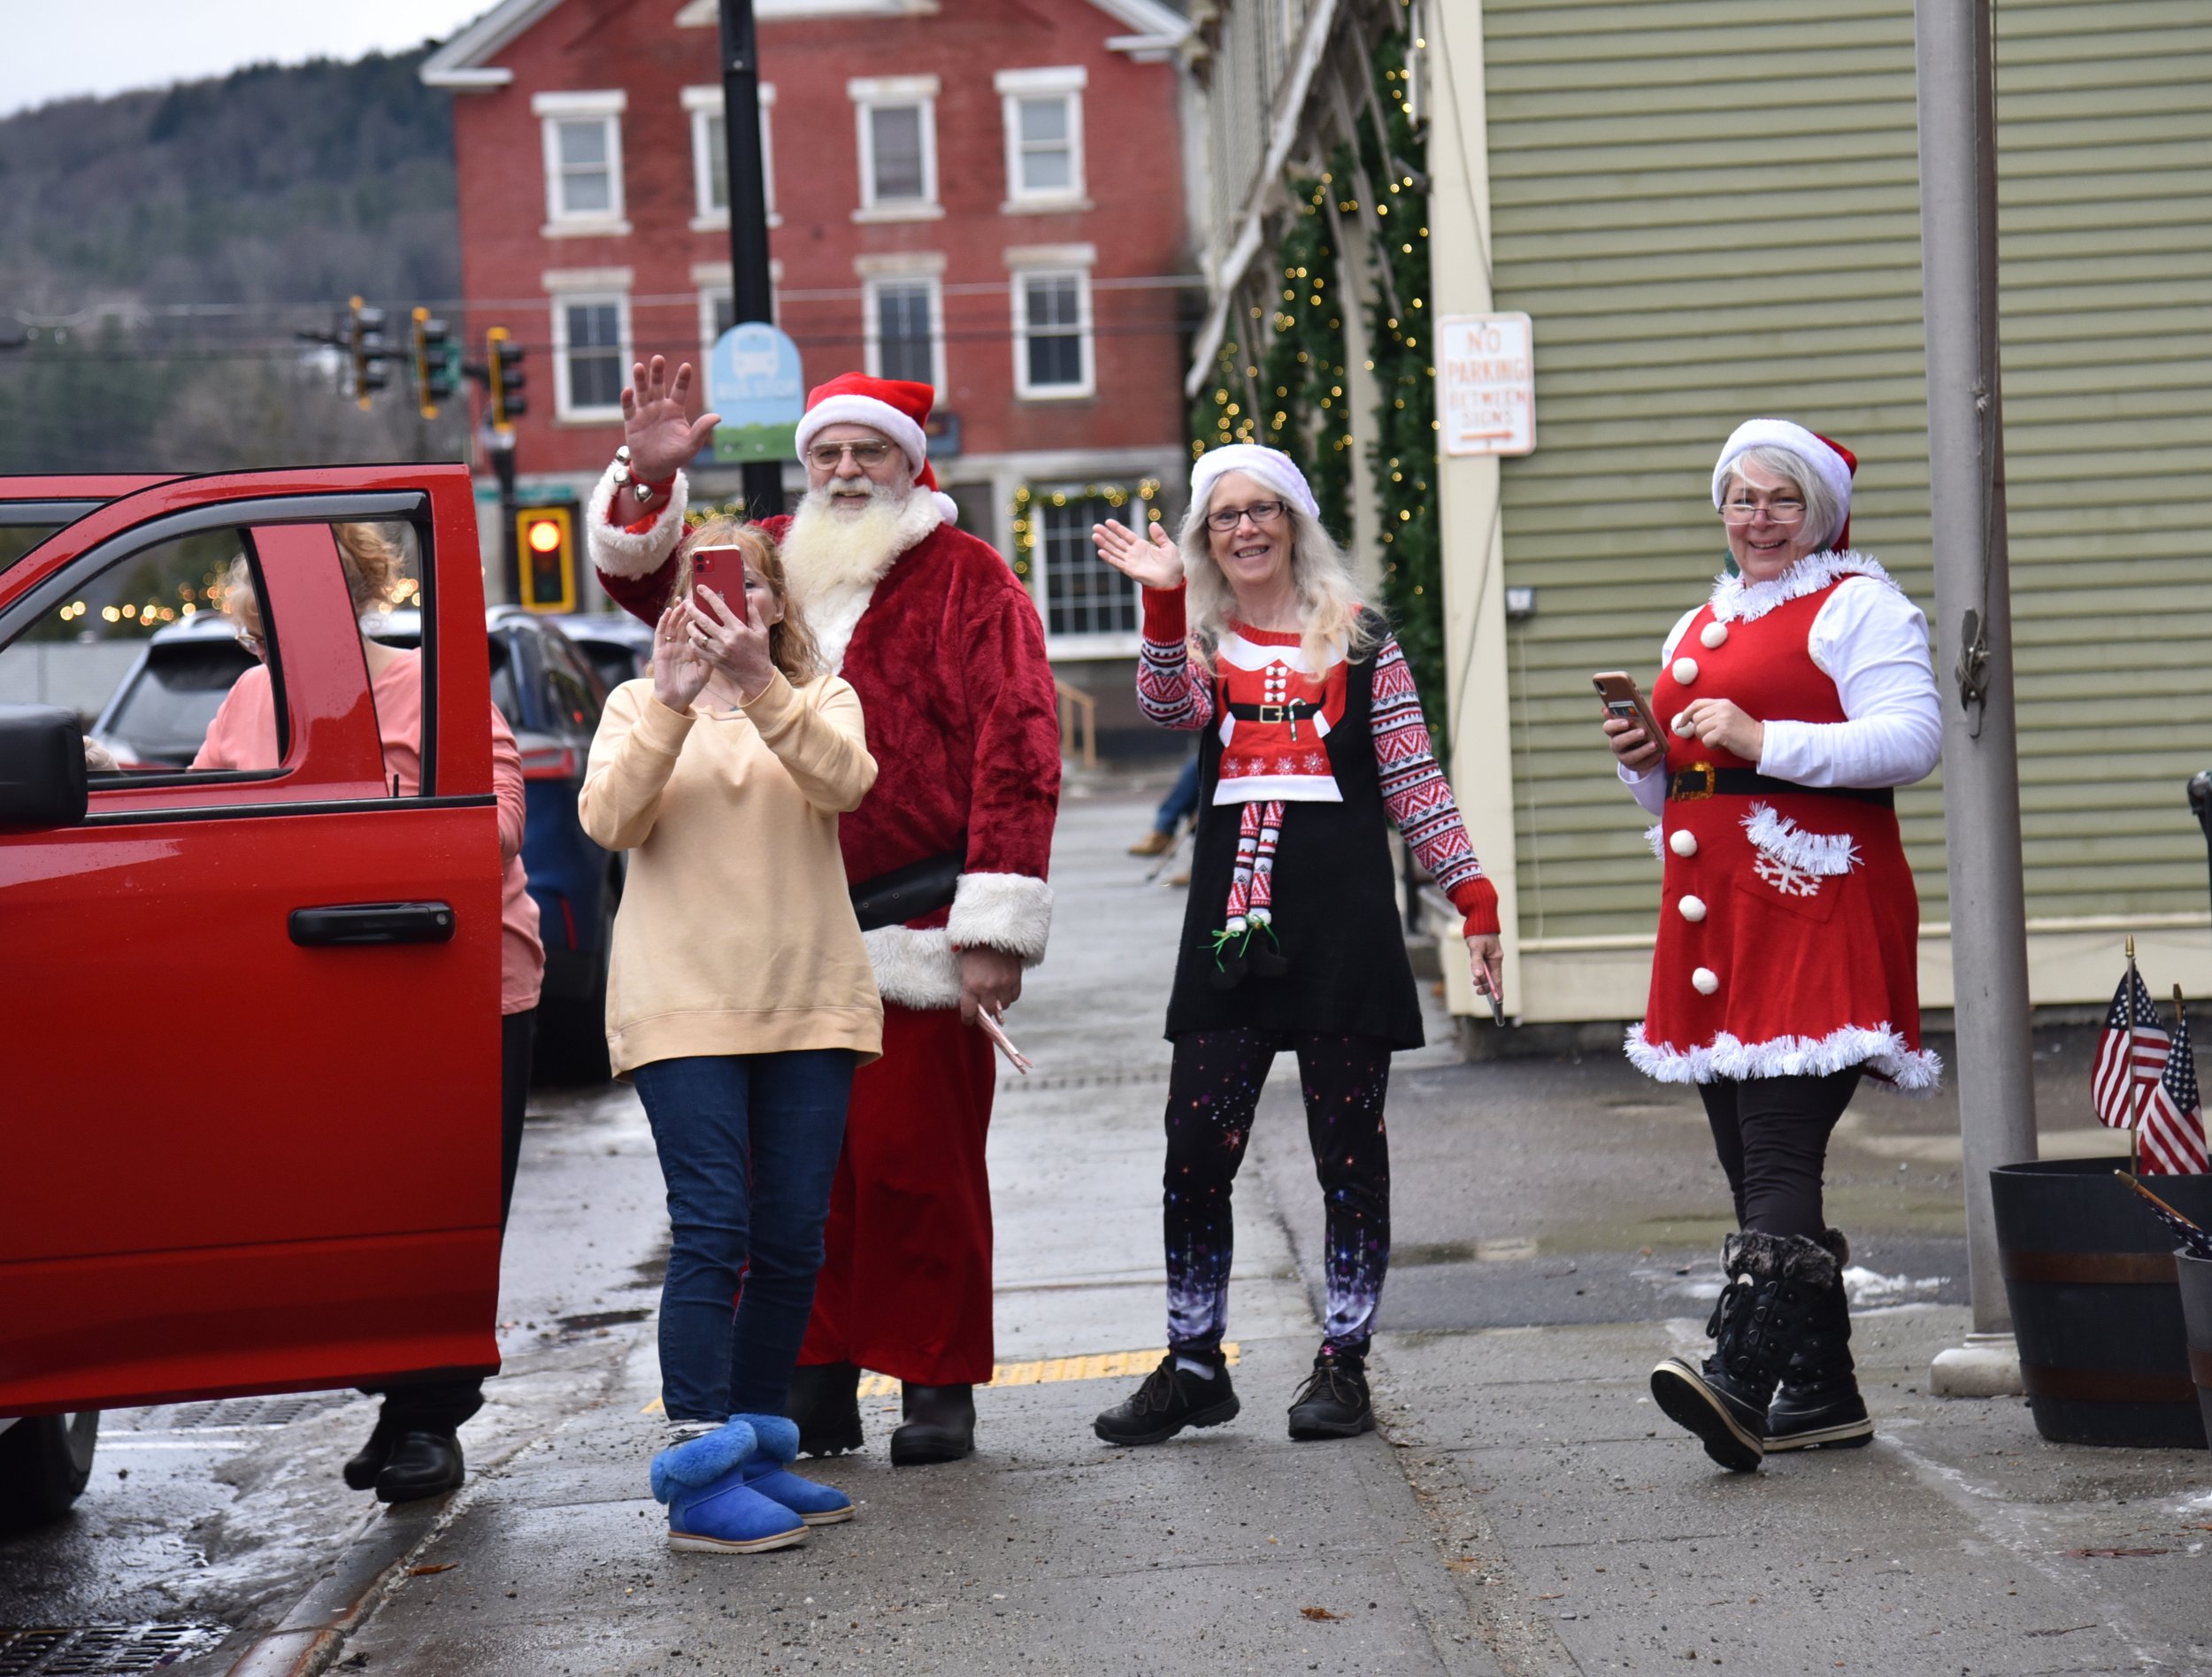  Does Santa just live in Waterbury? He’s made many appearances this season. This one at the American Legion. Left to right: Loleta Perry, Santa (or John Christian?), Wanda Woodard, and Mrs. Claus (a.k.a. Sarah Touchette). Photo by Gordon Miller 